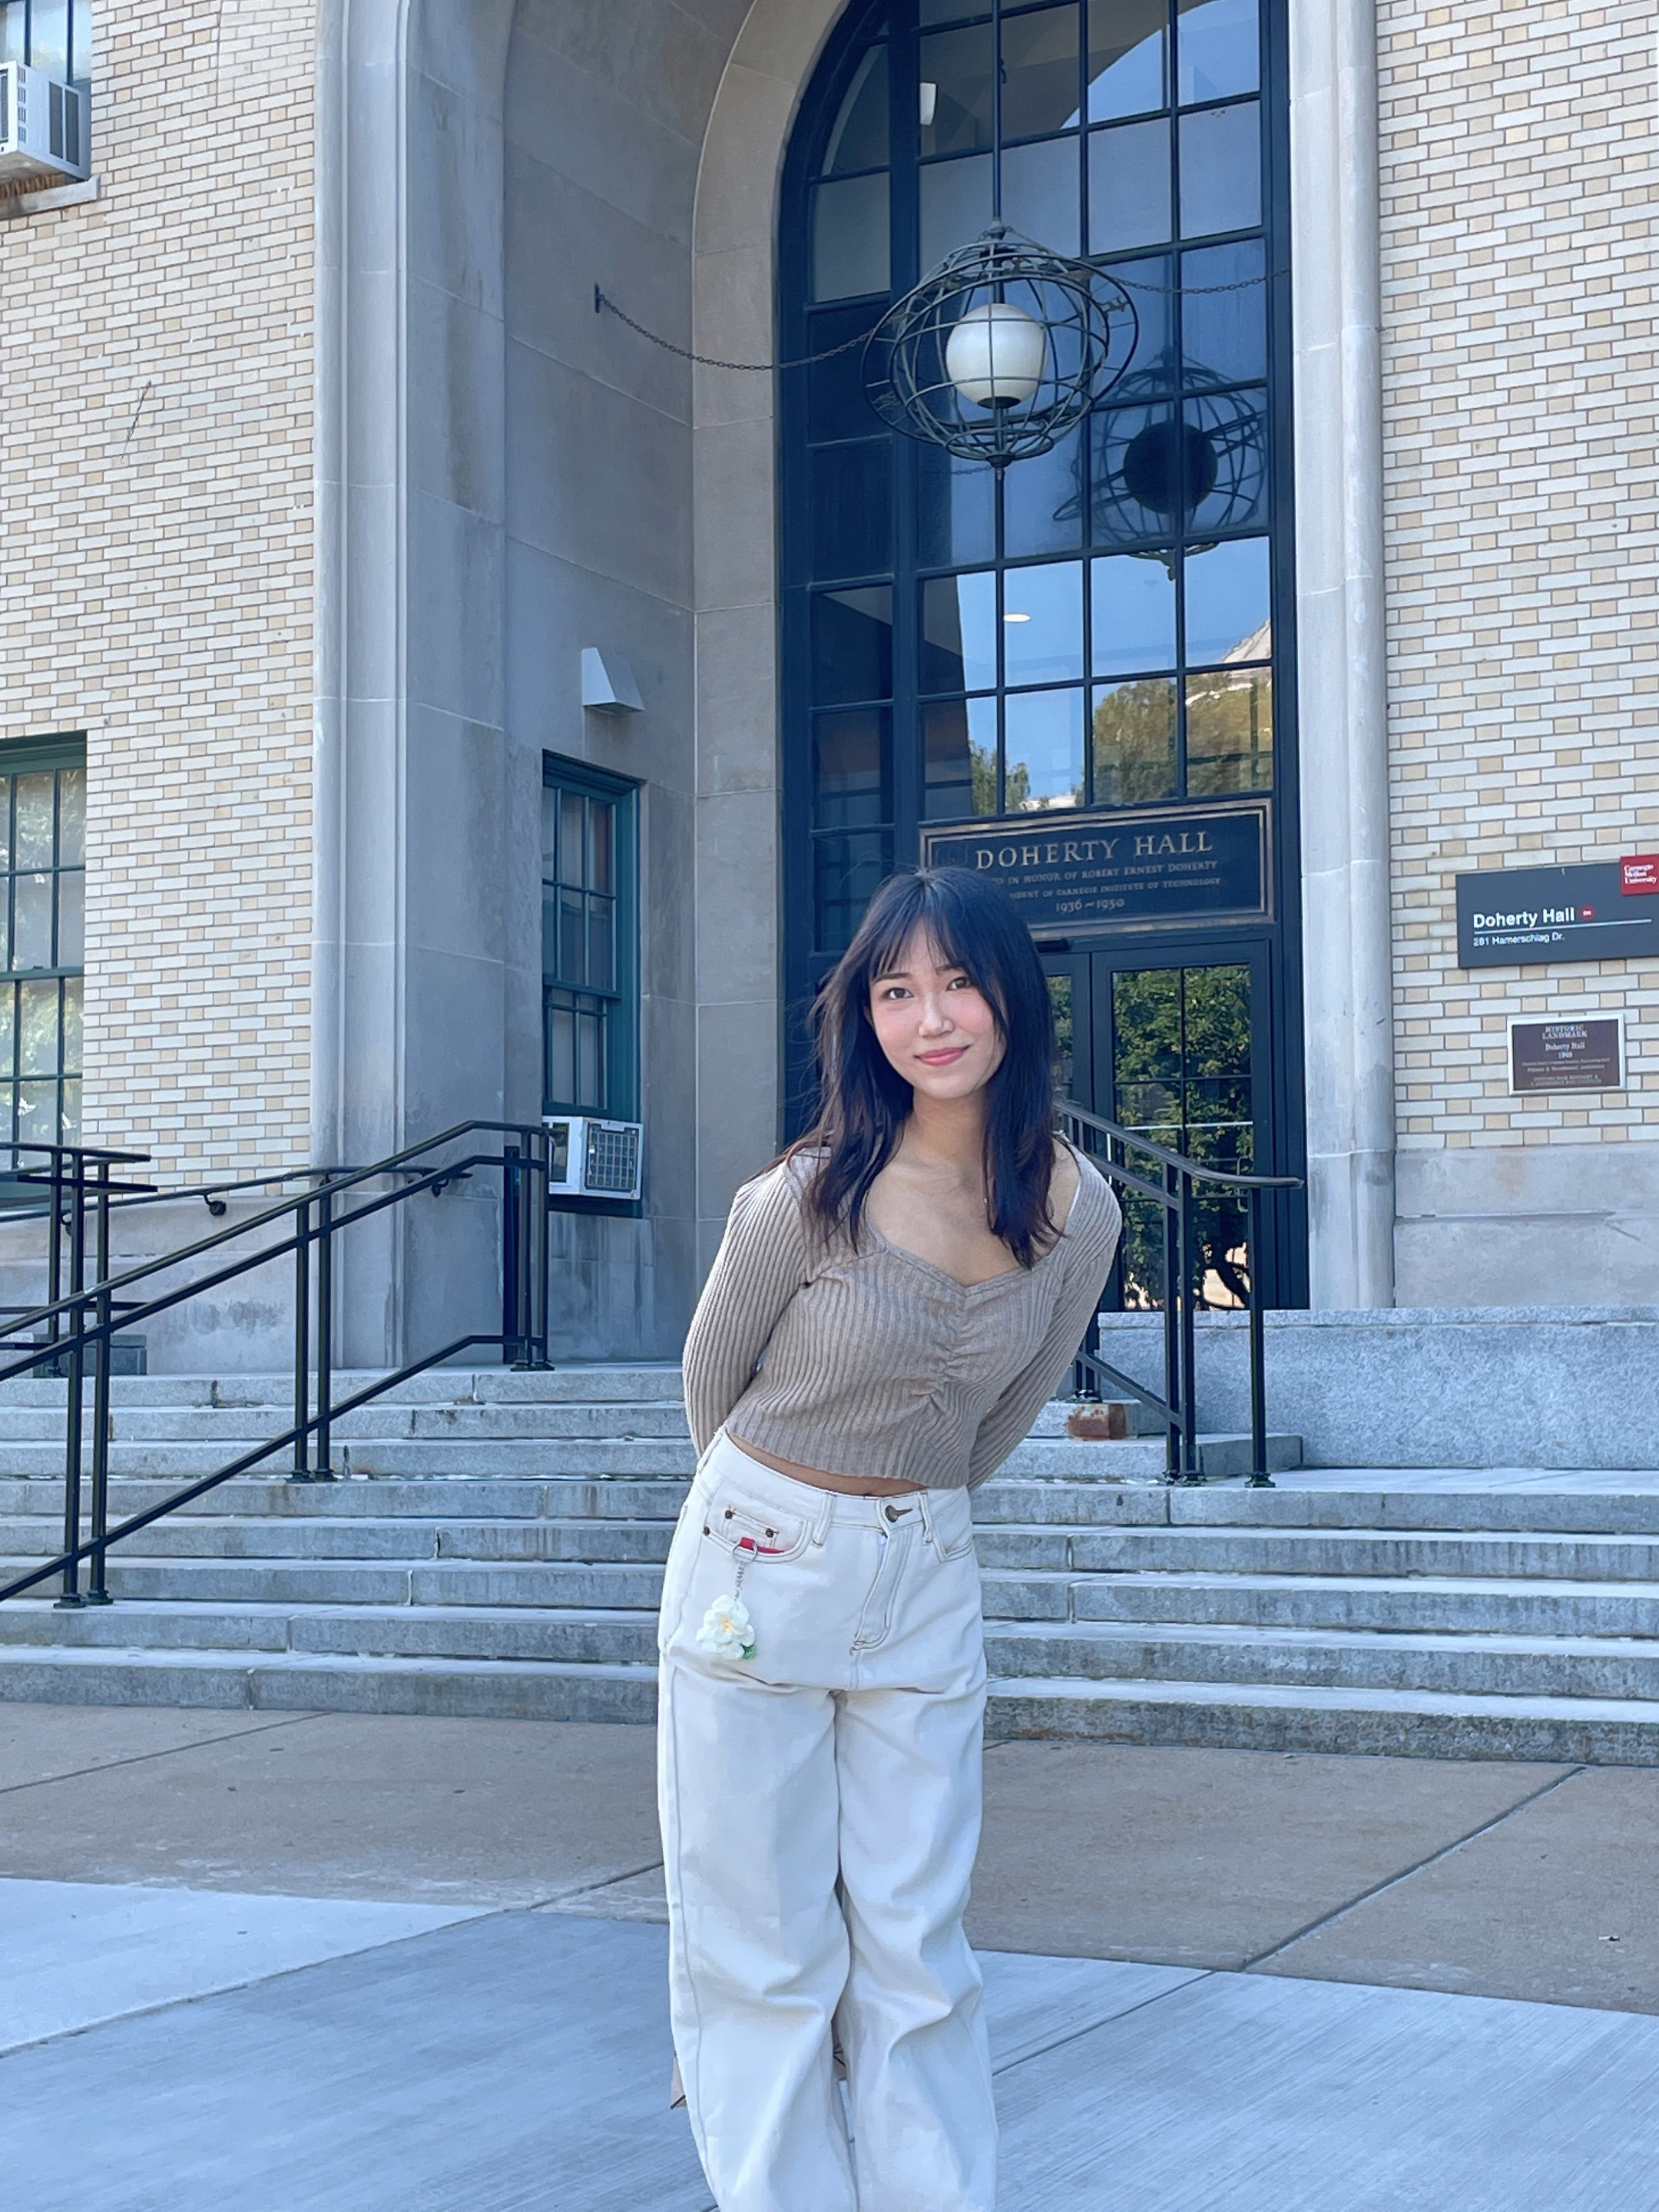 Yunfei Niu stands in front of Doherty Hall